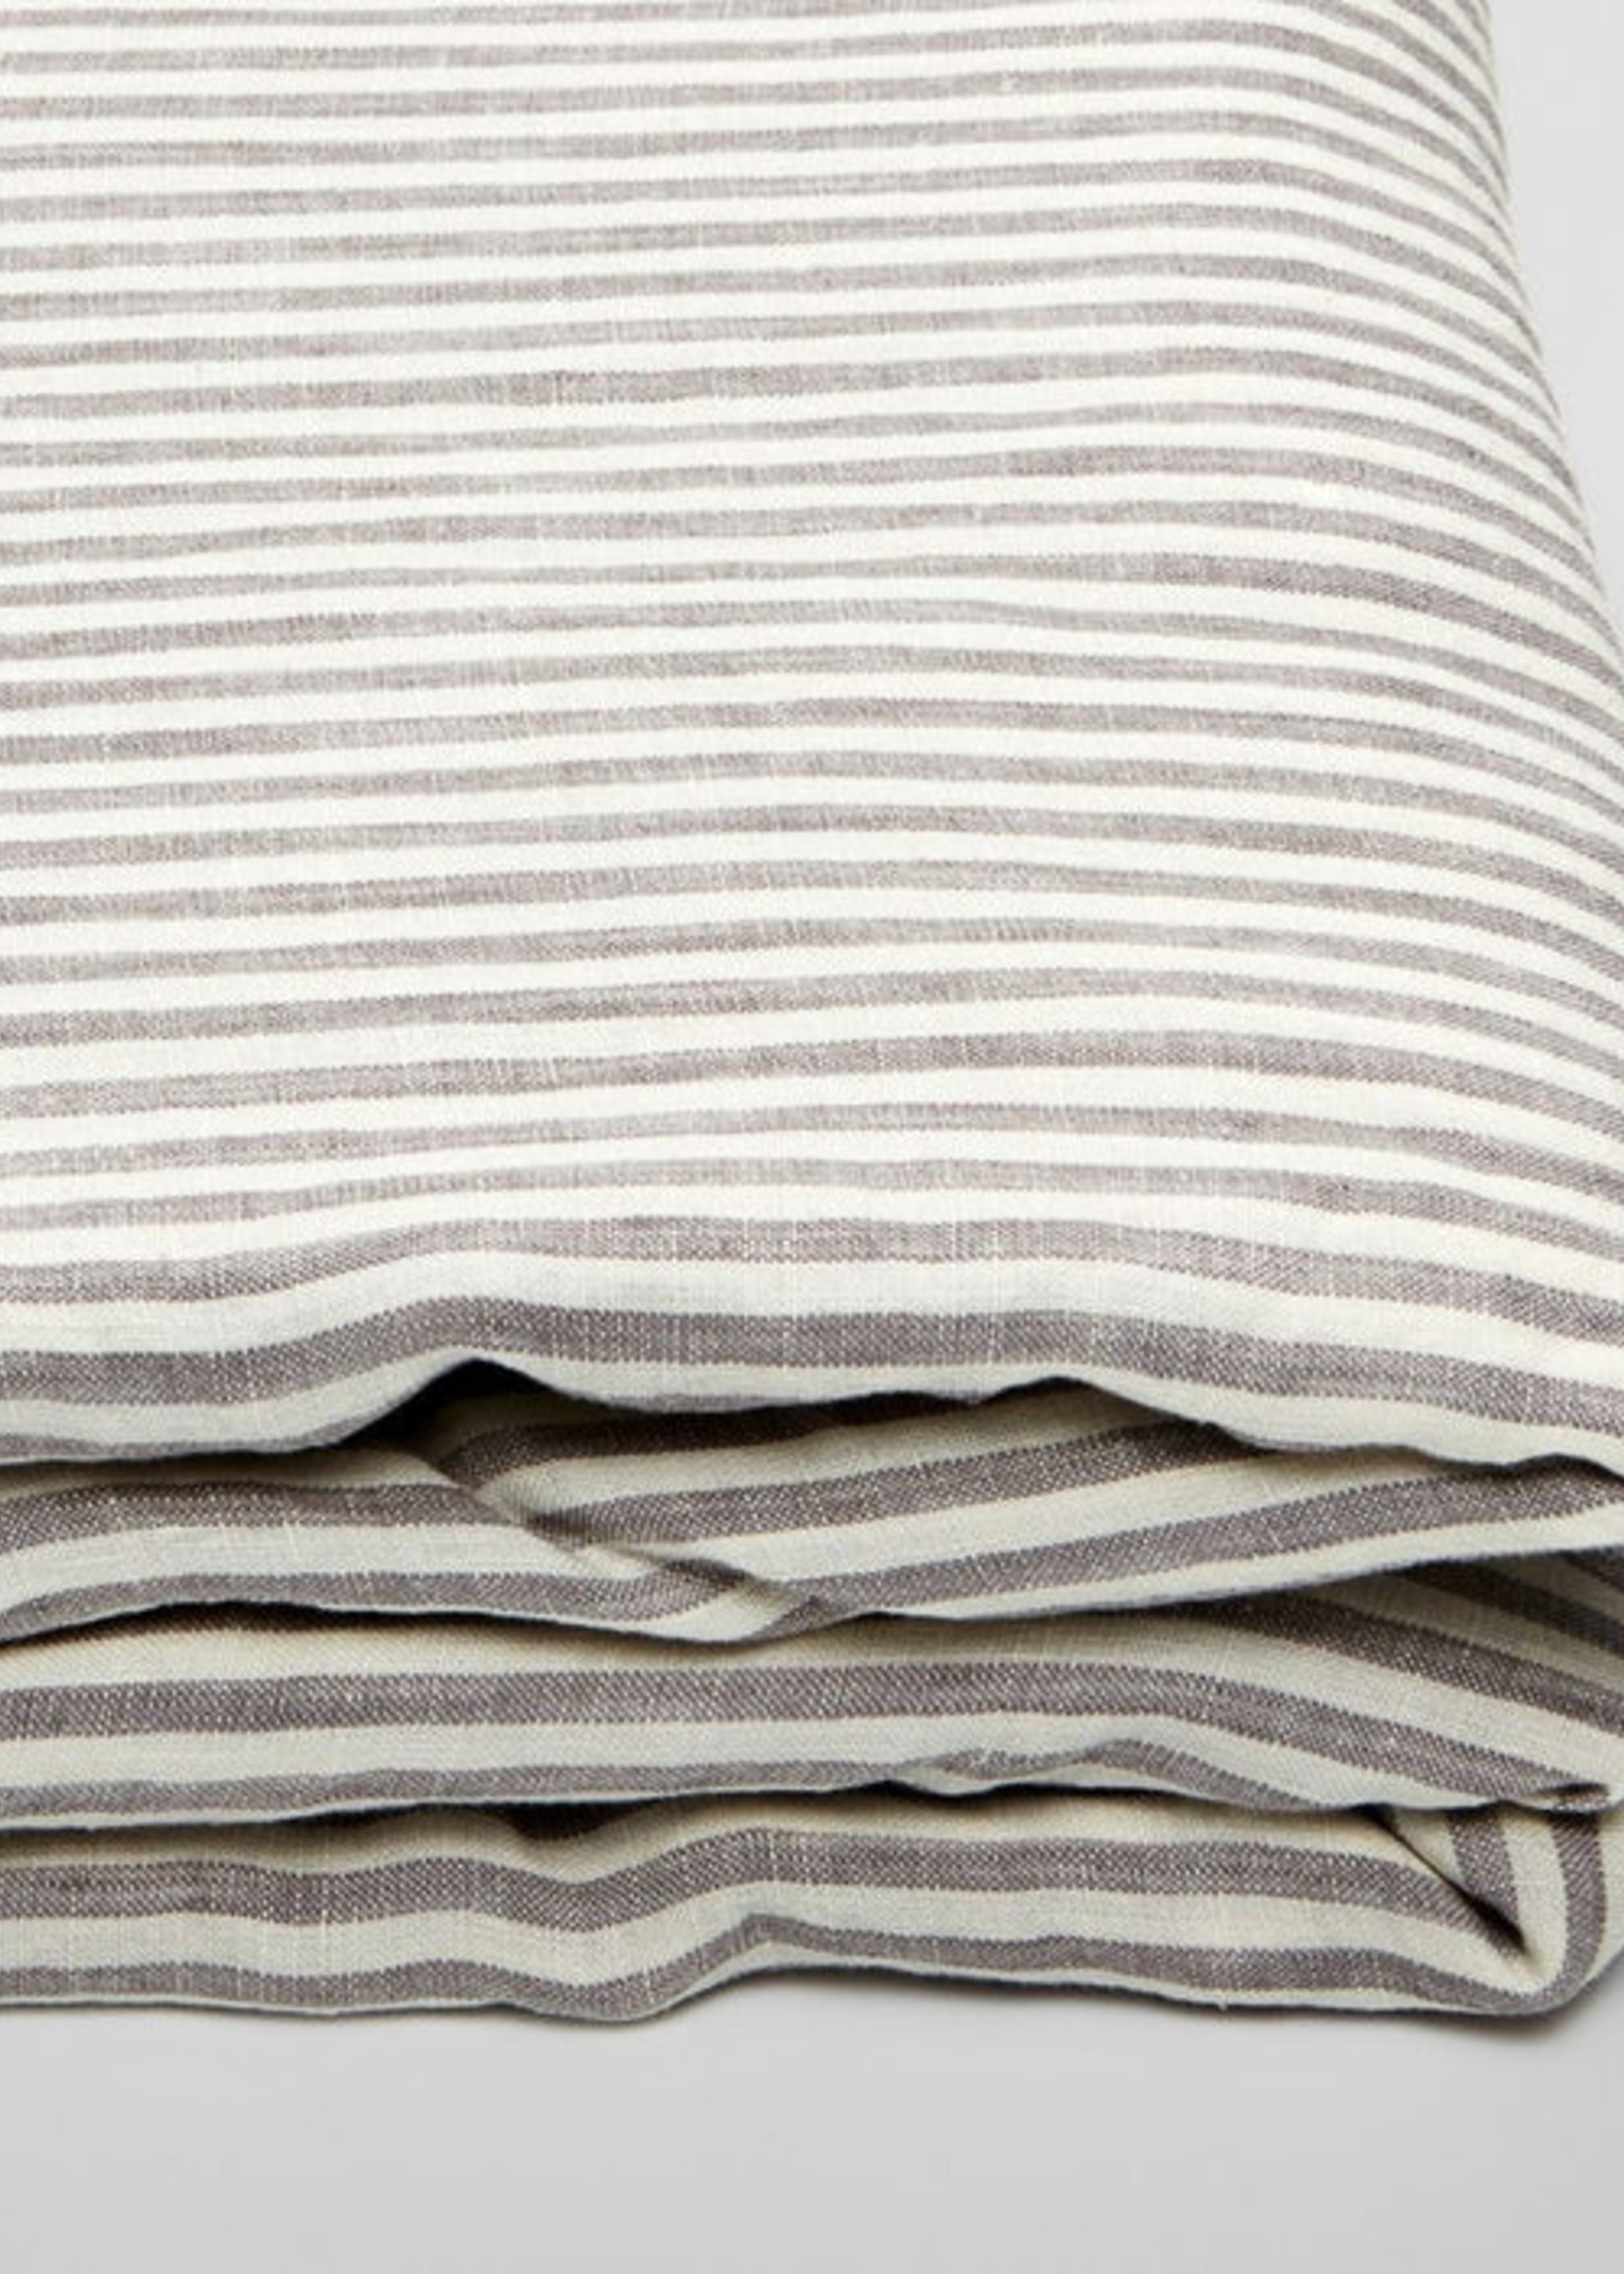 Linen Fitted Sheet in Grey & White Stripe